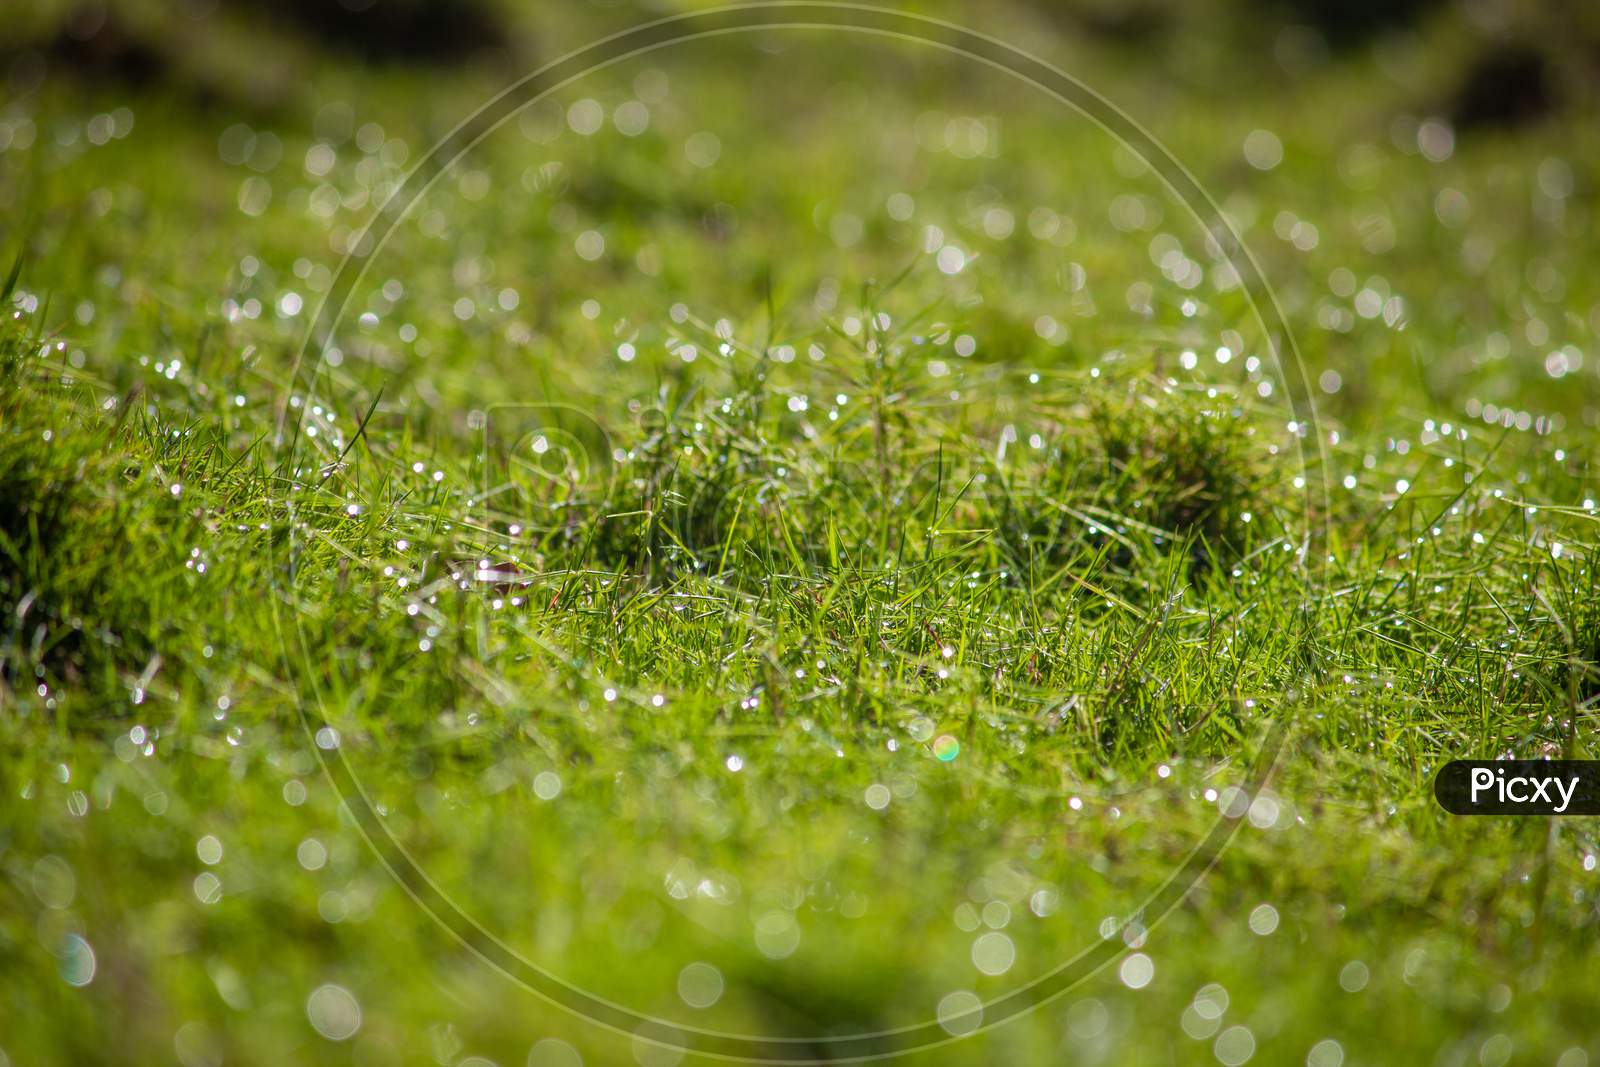 Beautiful View Of The Grass With Dew (Droplets Of Water) During The Morning With Sunlight Giving A Bokeh Effect. Nature Green Grass Background. Garden Grass Texture.